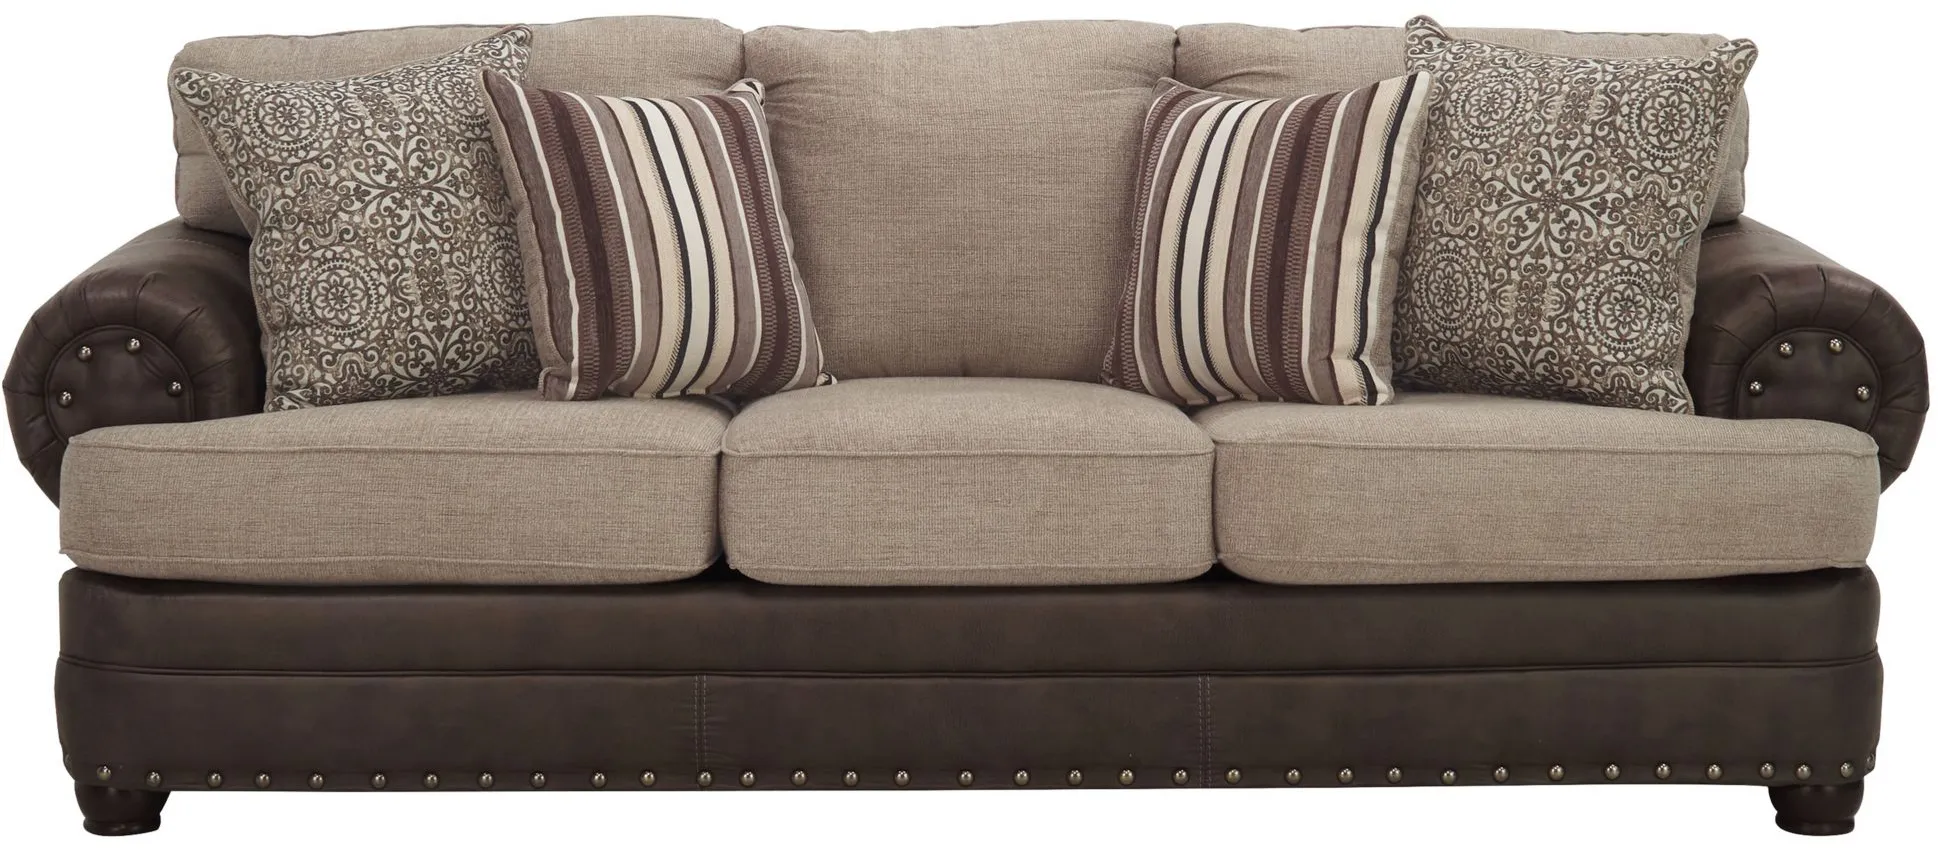 Behold Washington LLC Newman 2-pc. Chenille Sofa and Loveseat Set in Gray by Behold Washington